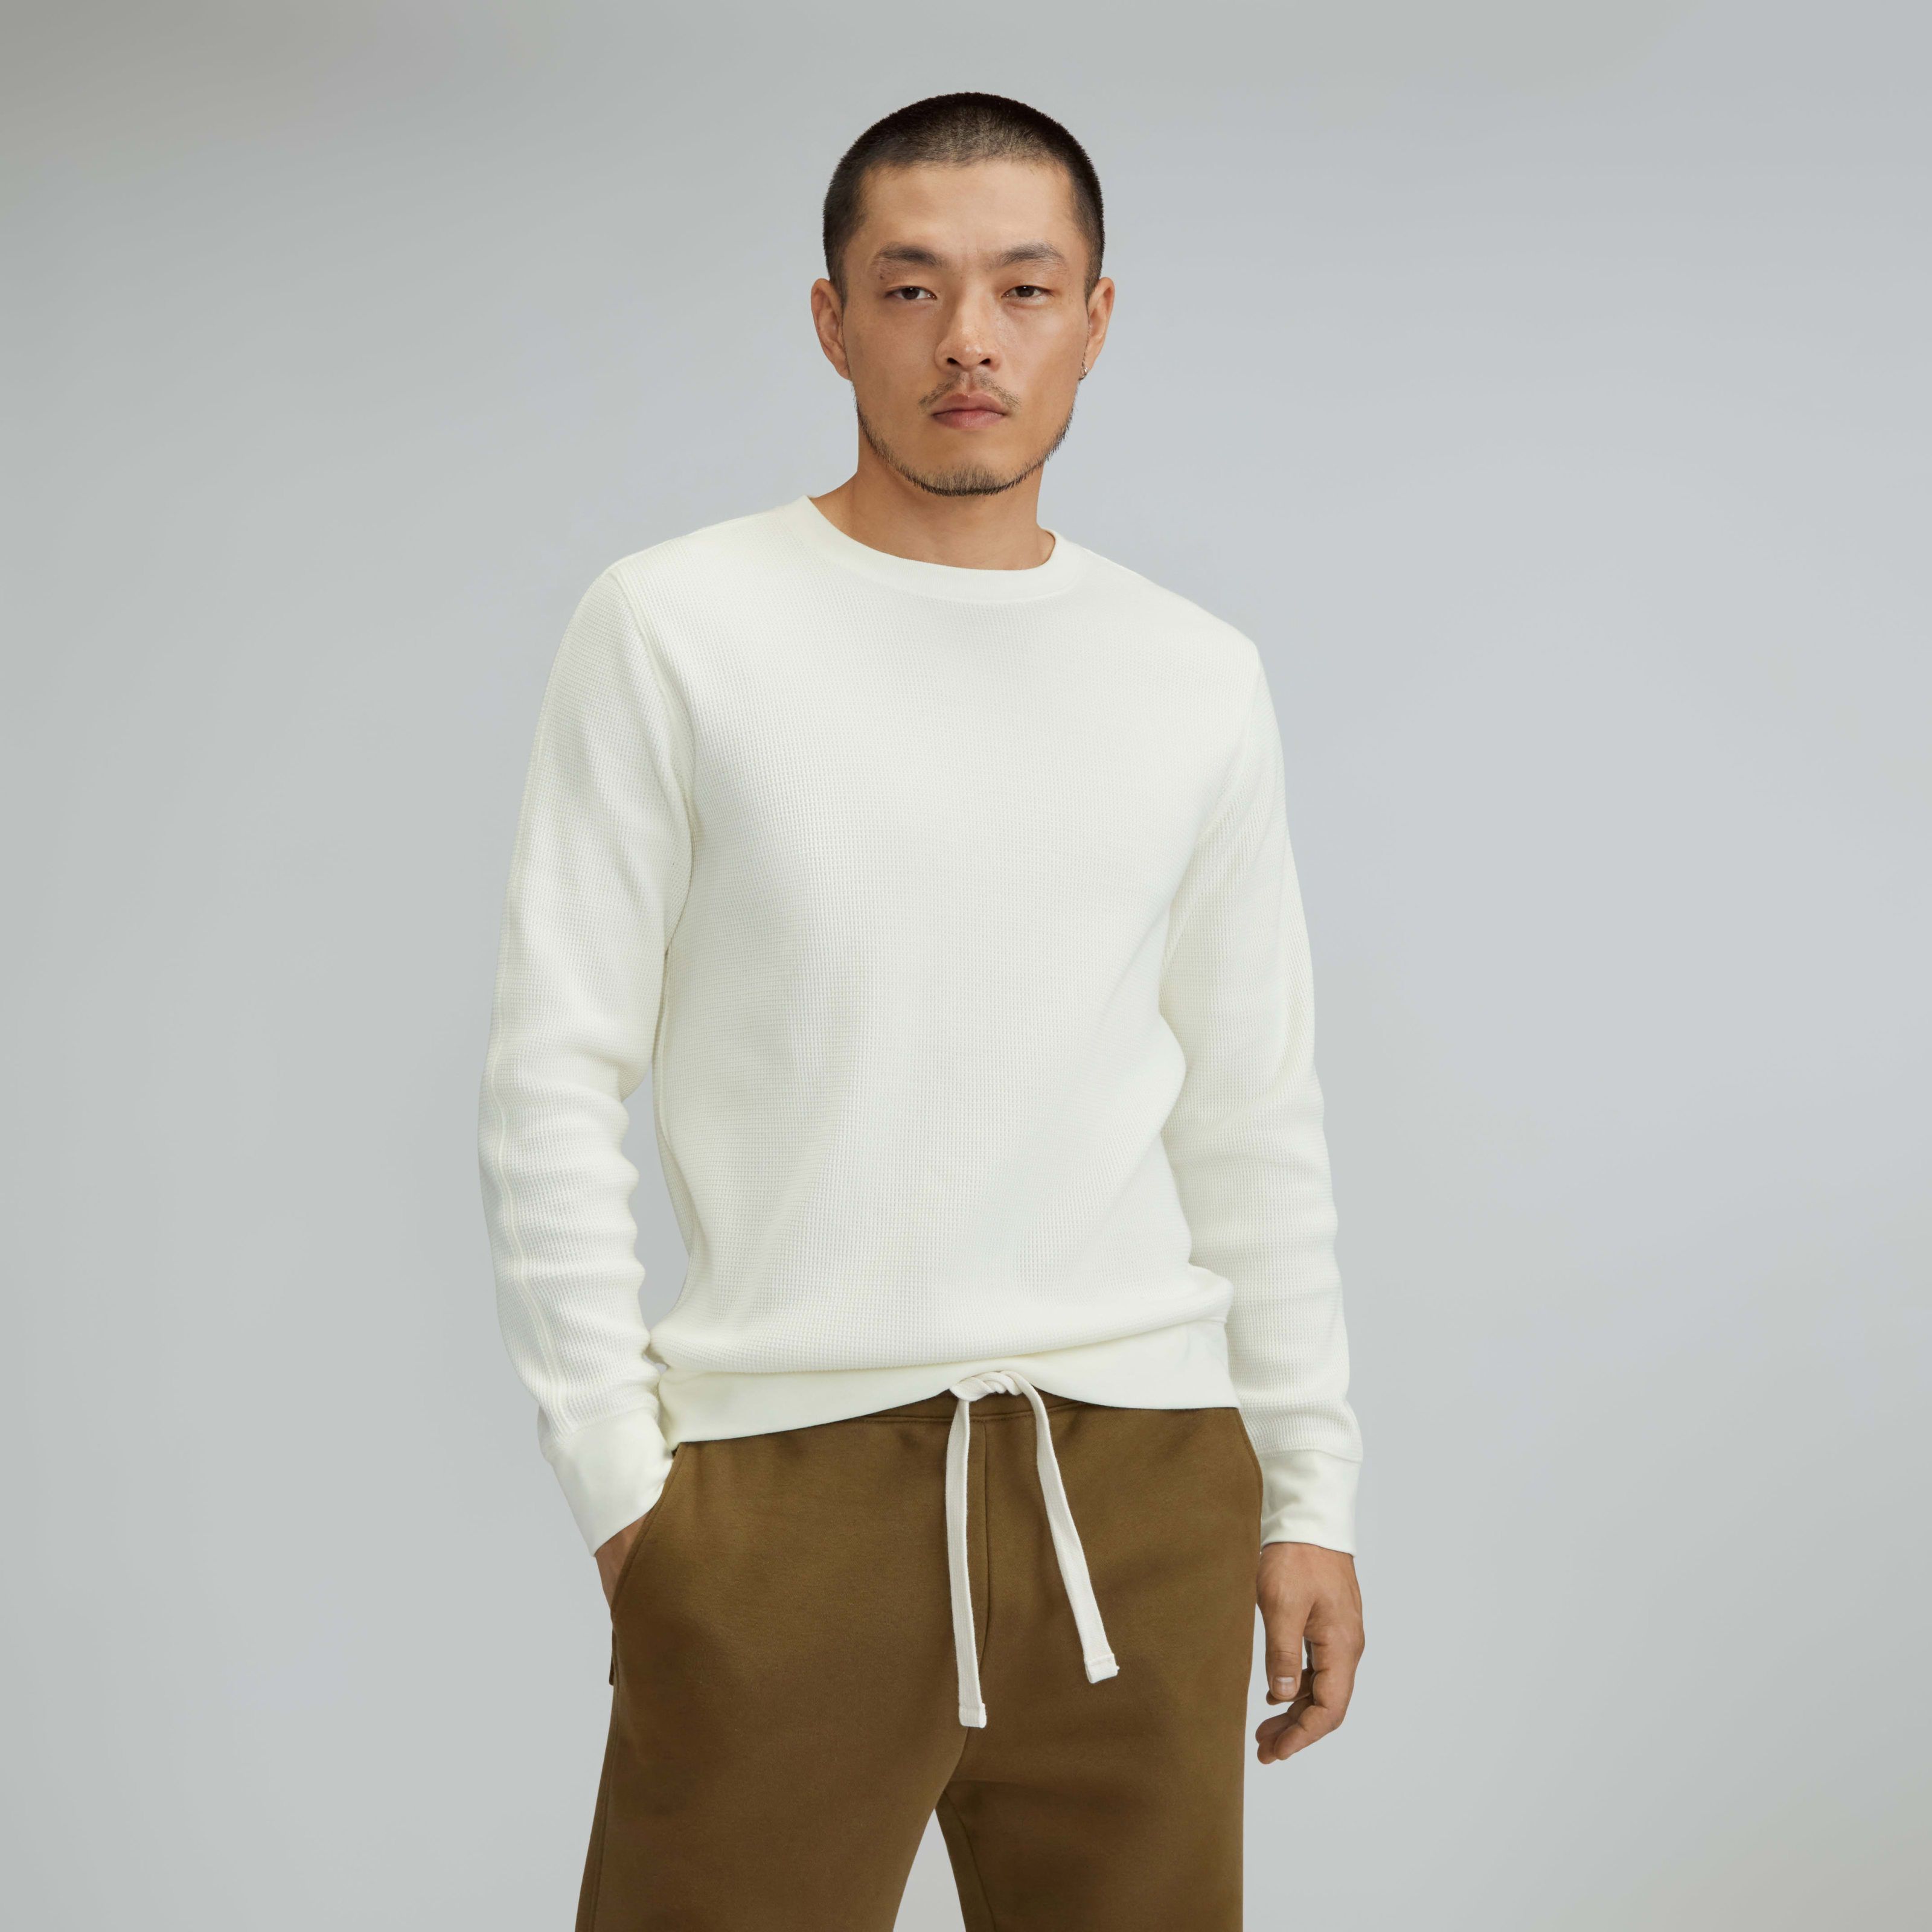 Men's Waffle Long-Sleeve Crew T-Shirt by Everlane in Off White, Size M | Everlane